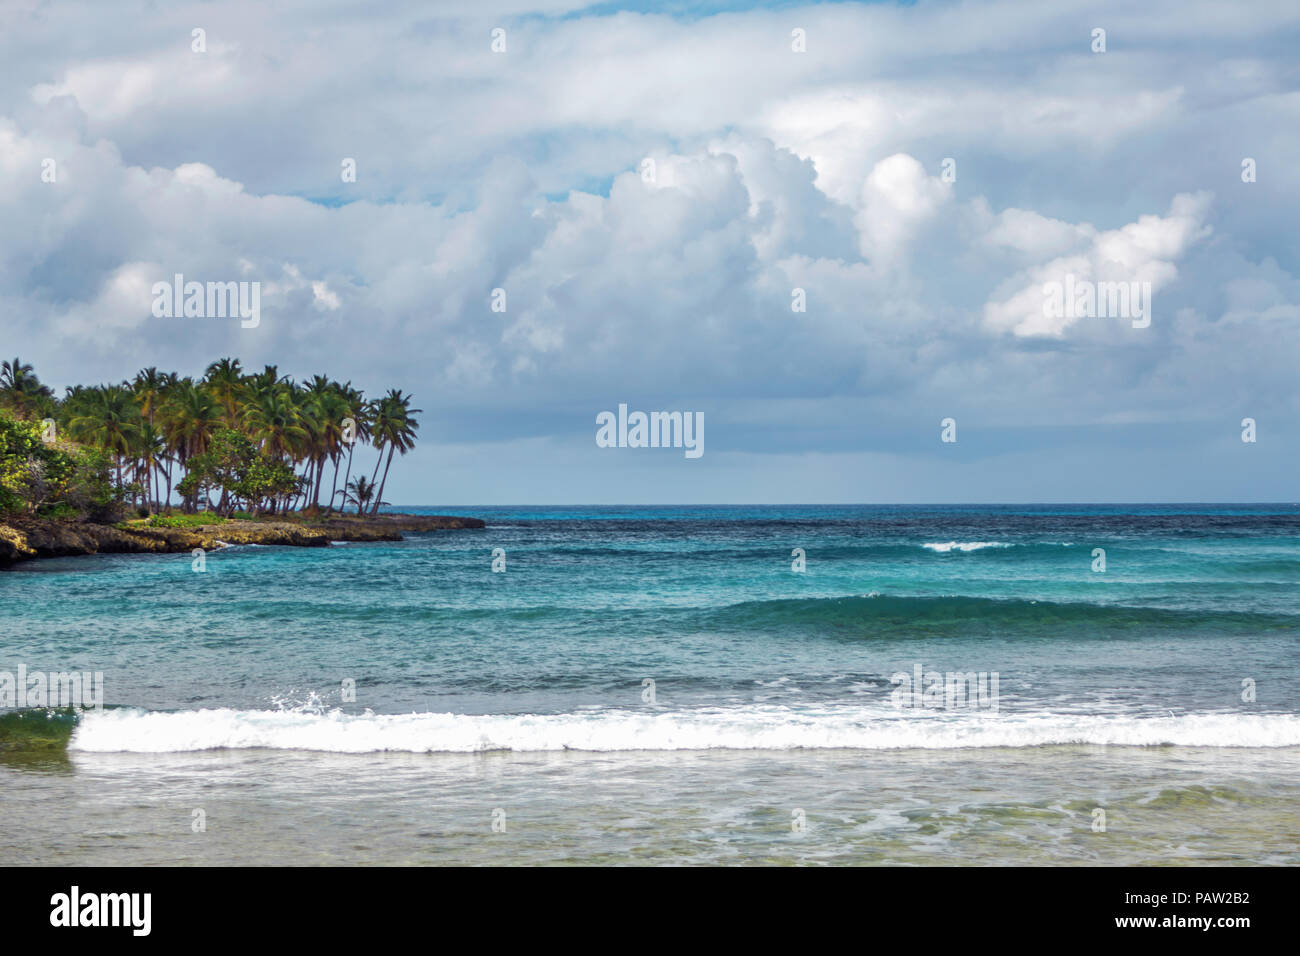 sea Bay in Samana, Dominican Republic. Sea, shore with palm trees and sky with storm clouds Stock Photo